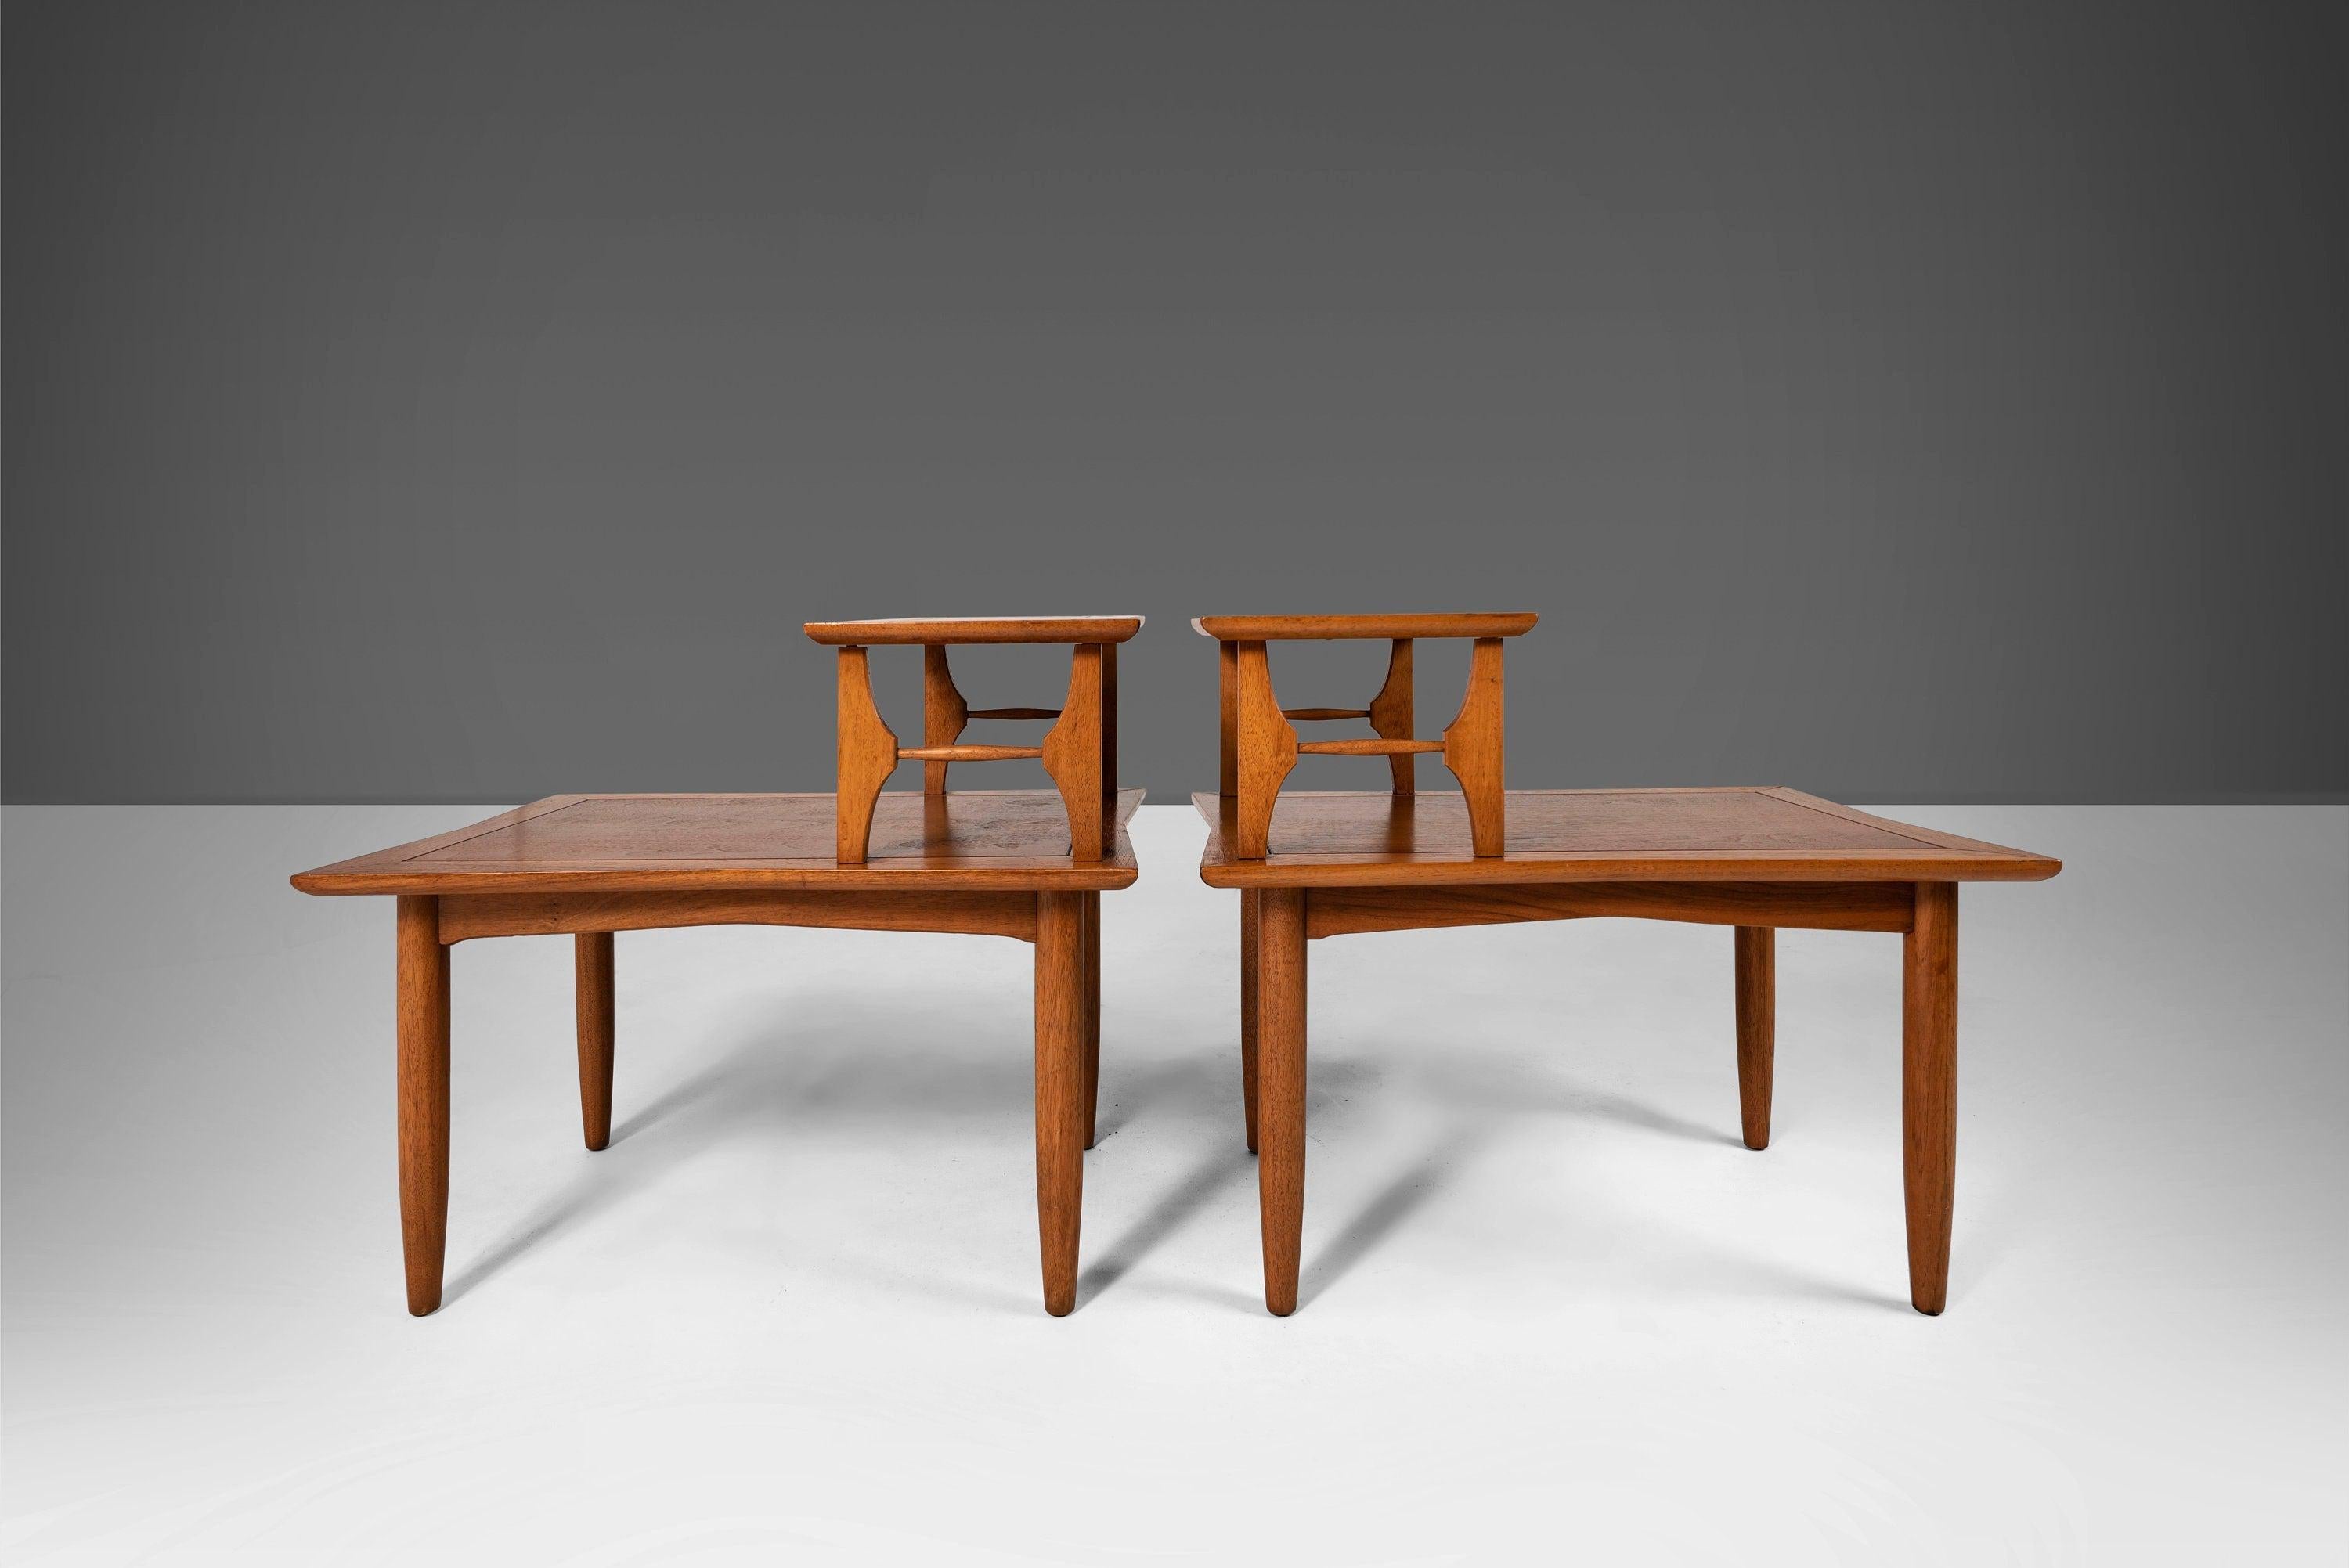 American Pair of 2-Tier Mid-Century Modern End Tables Attributed to Lubberts & Mulder For Sale